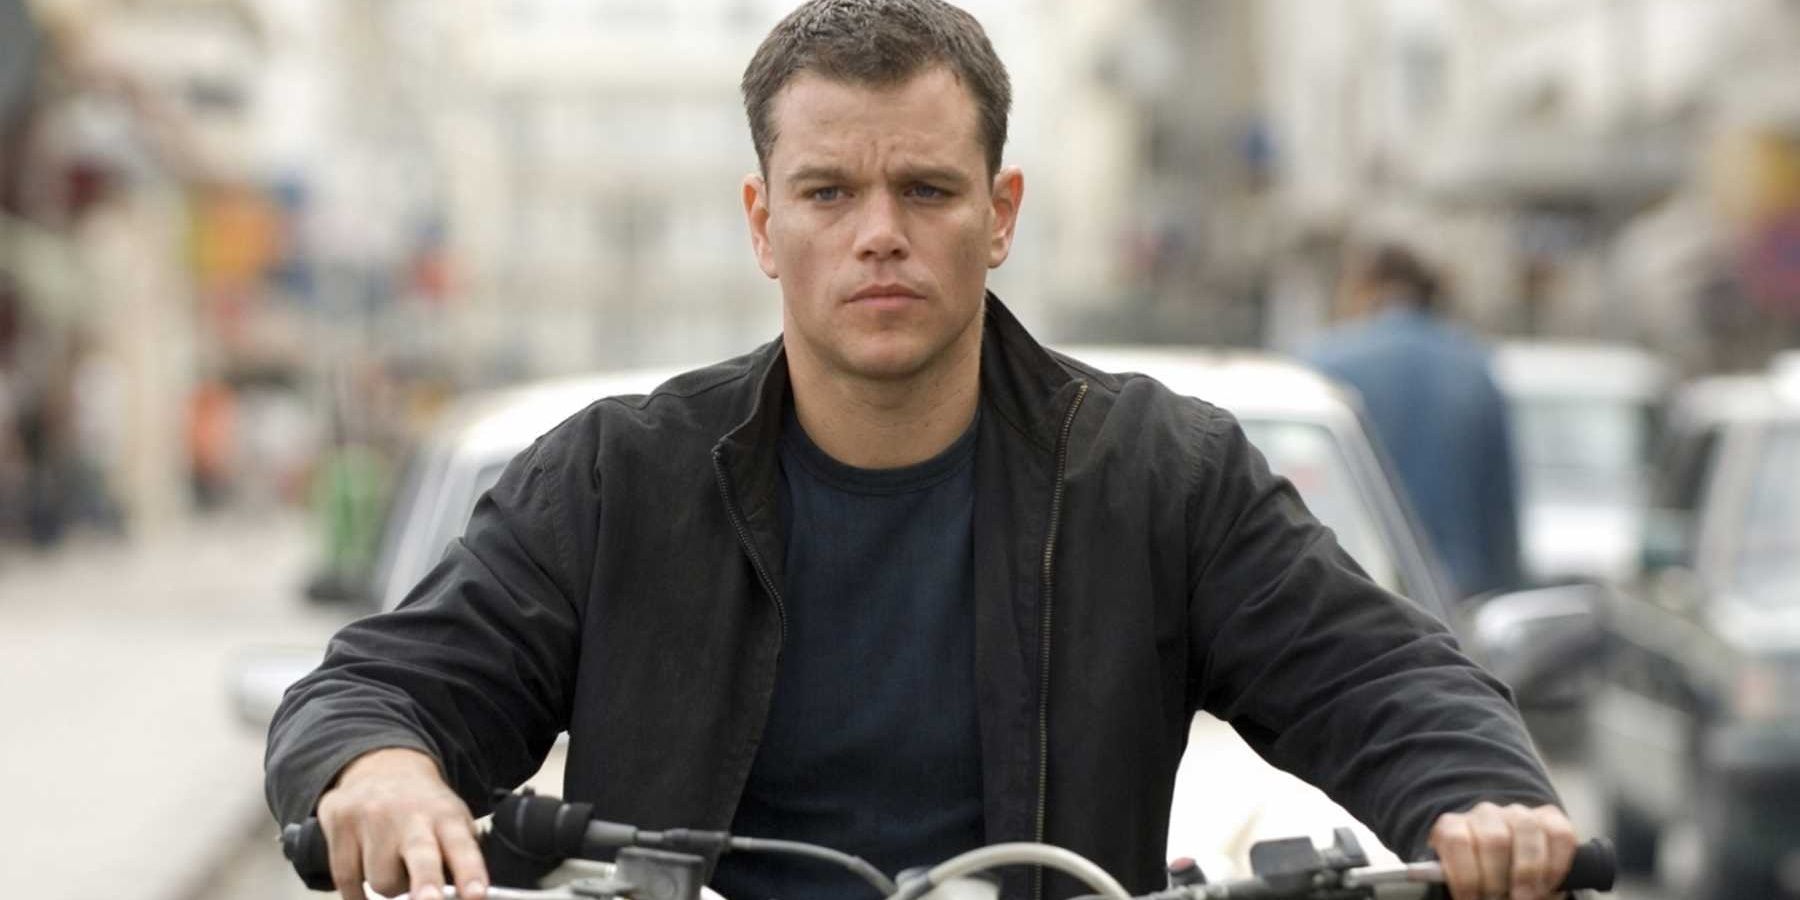 Jason Bourne on a motorcycle in The Bourne Ultimatum